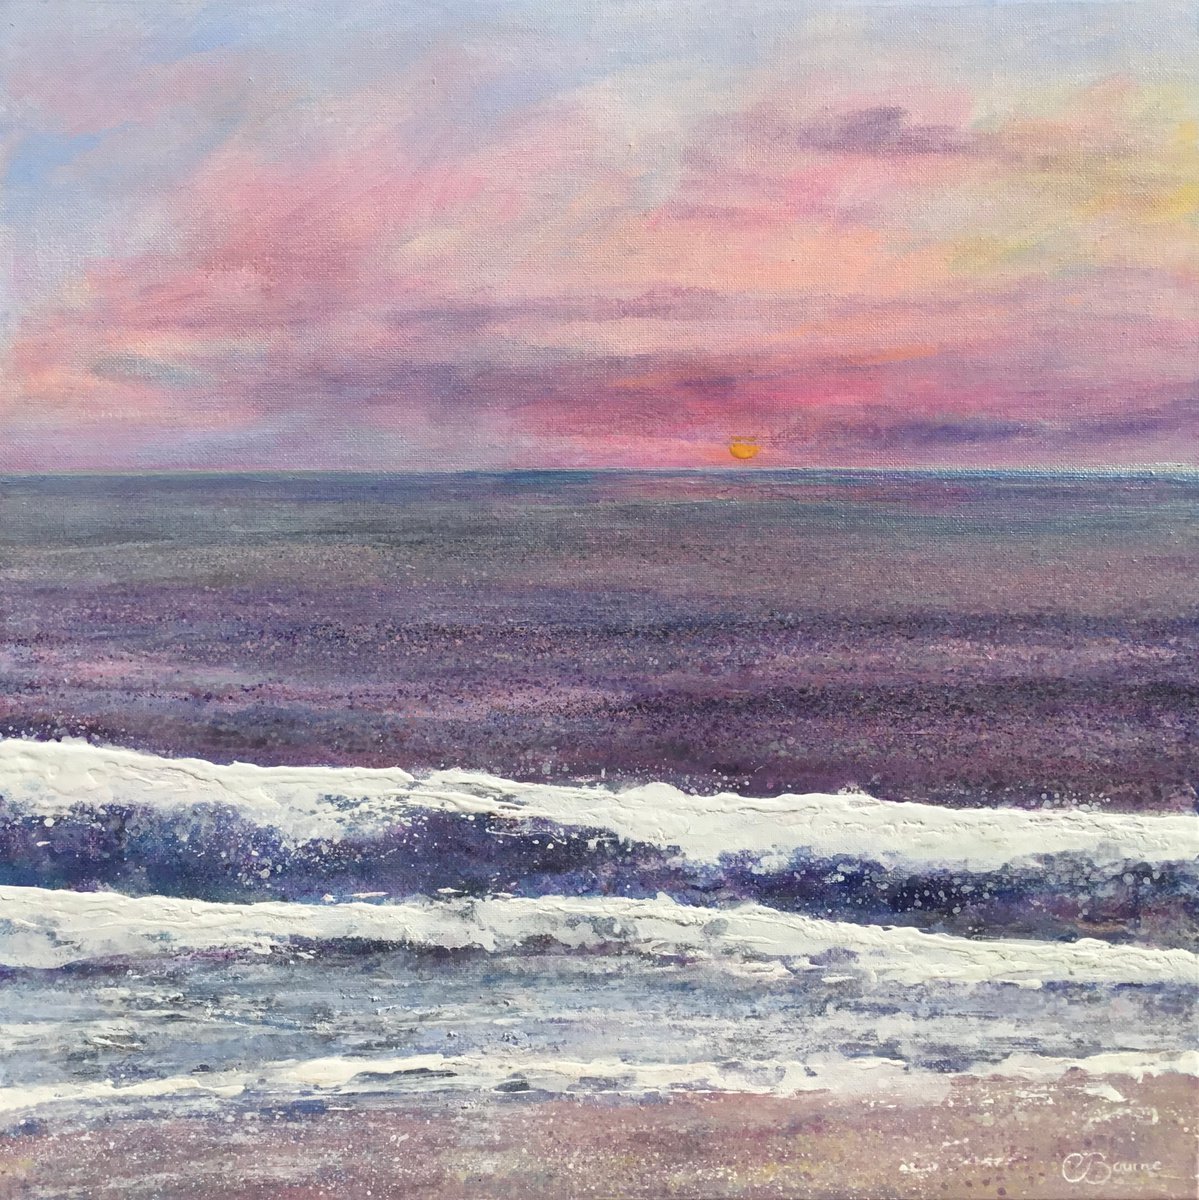 Sunset over a silver sea by Chris Bourne